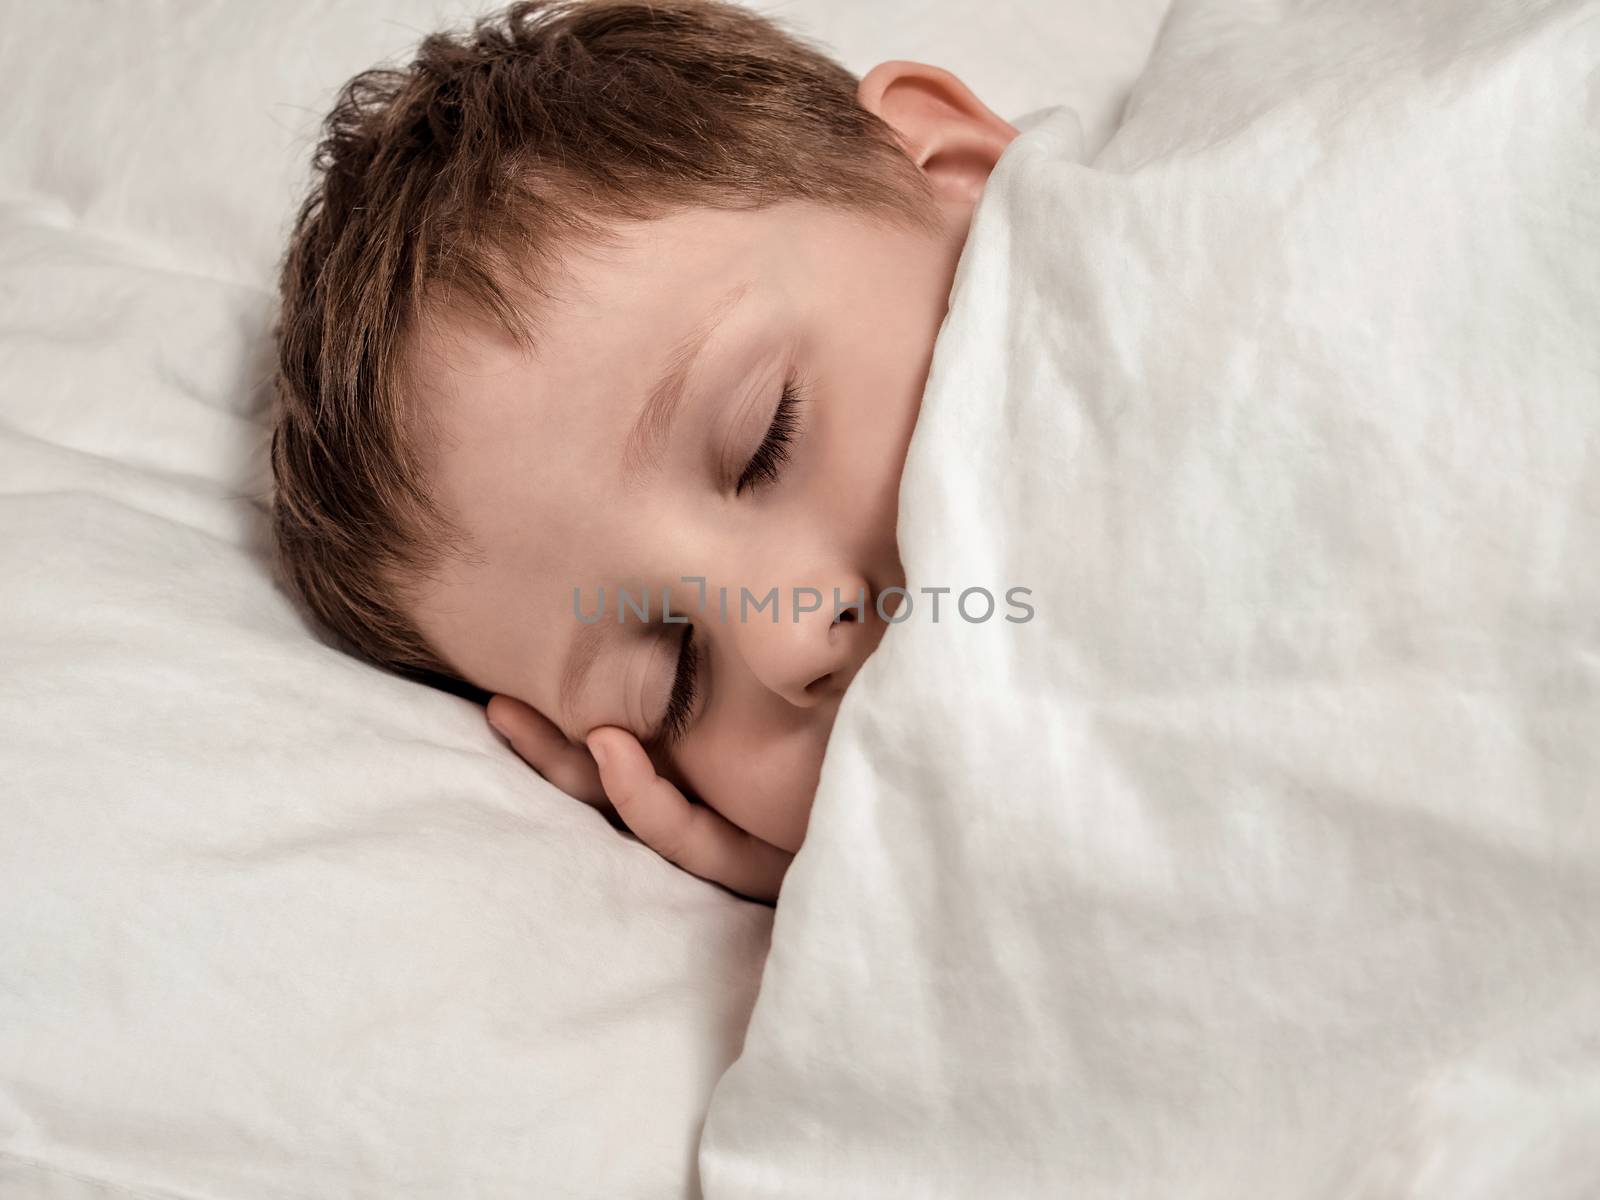 Sleeping young boy in white bed by fascinadora